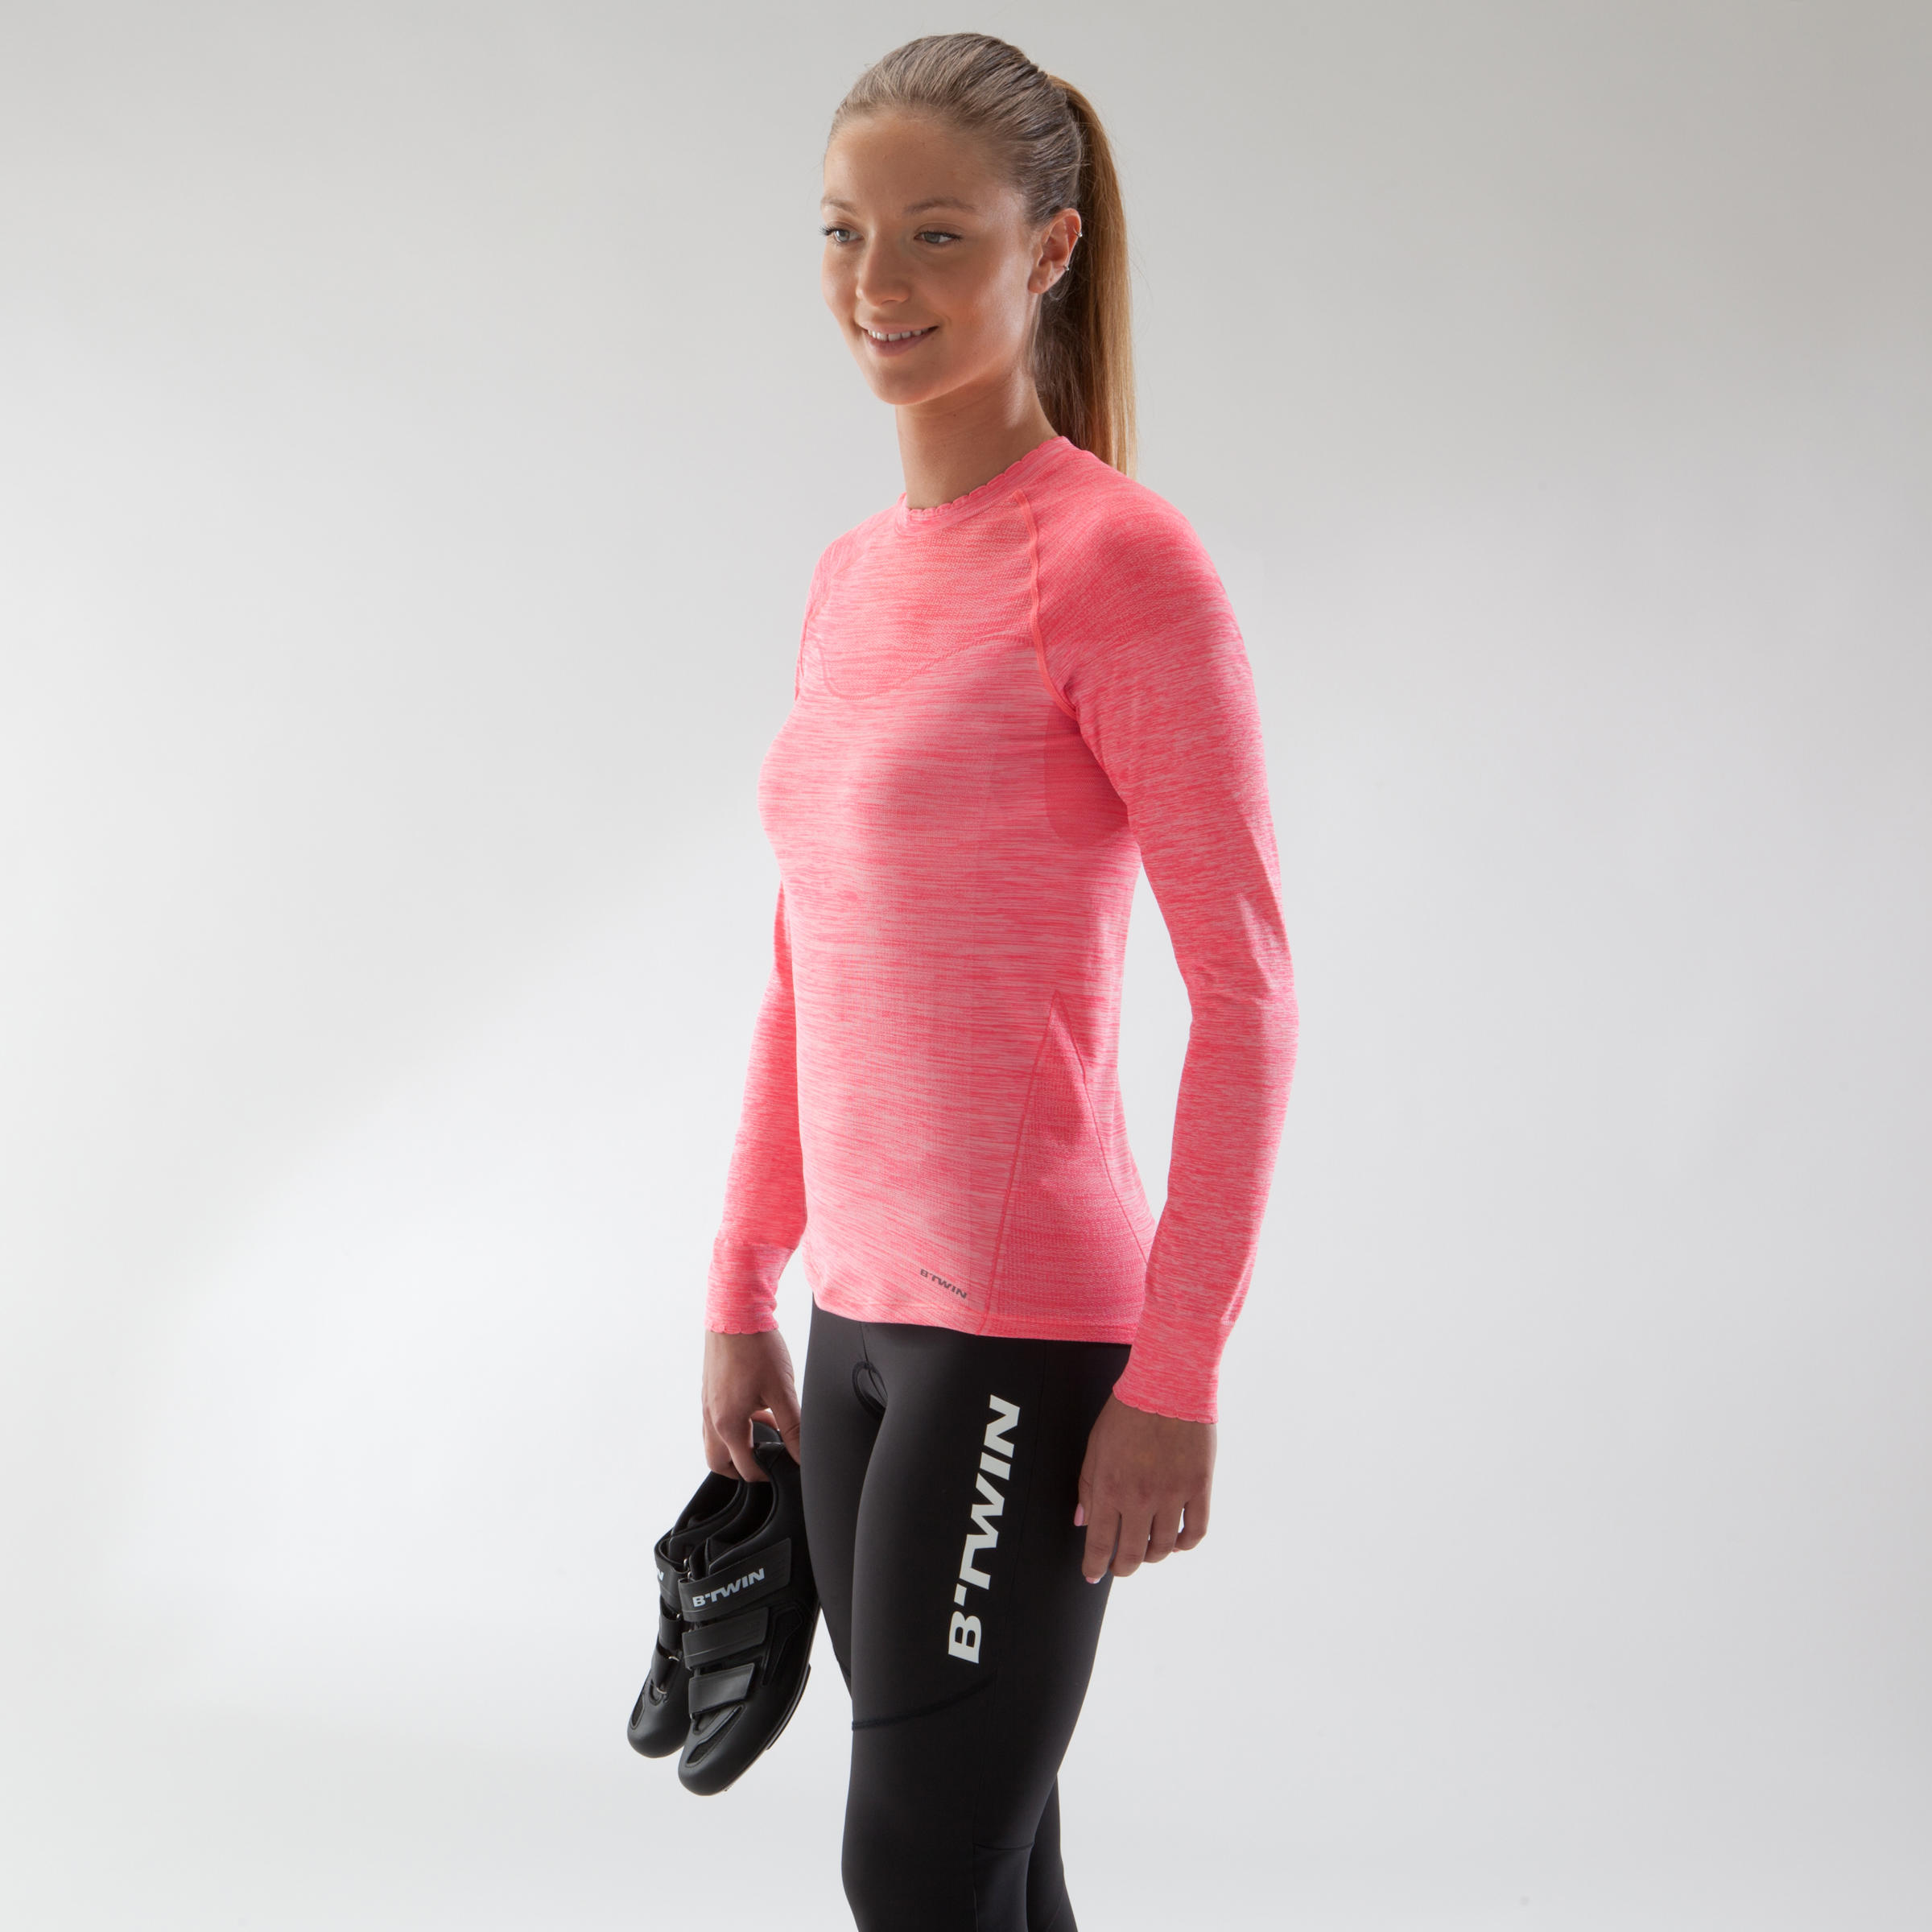 500 Women's Long-Sleeved Cycling Base Layer - Pink 5/12